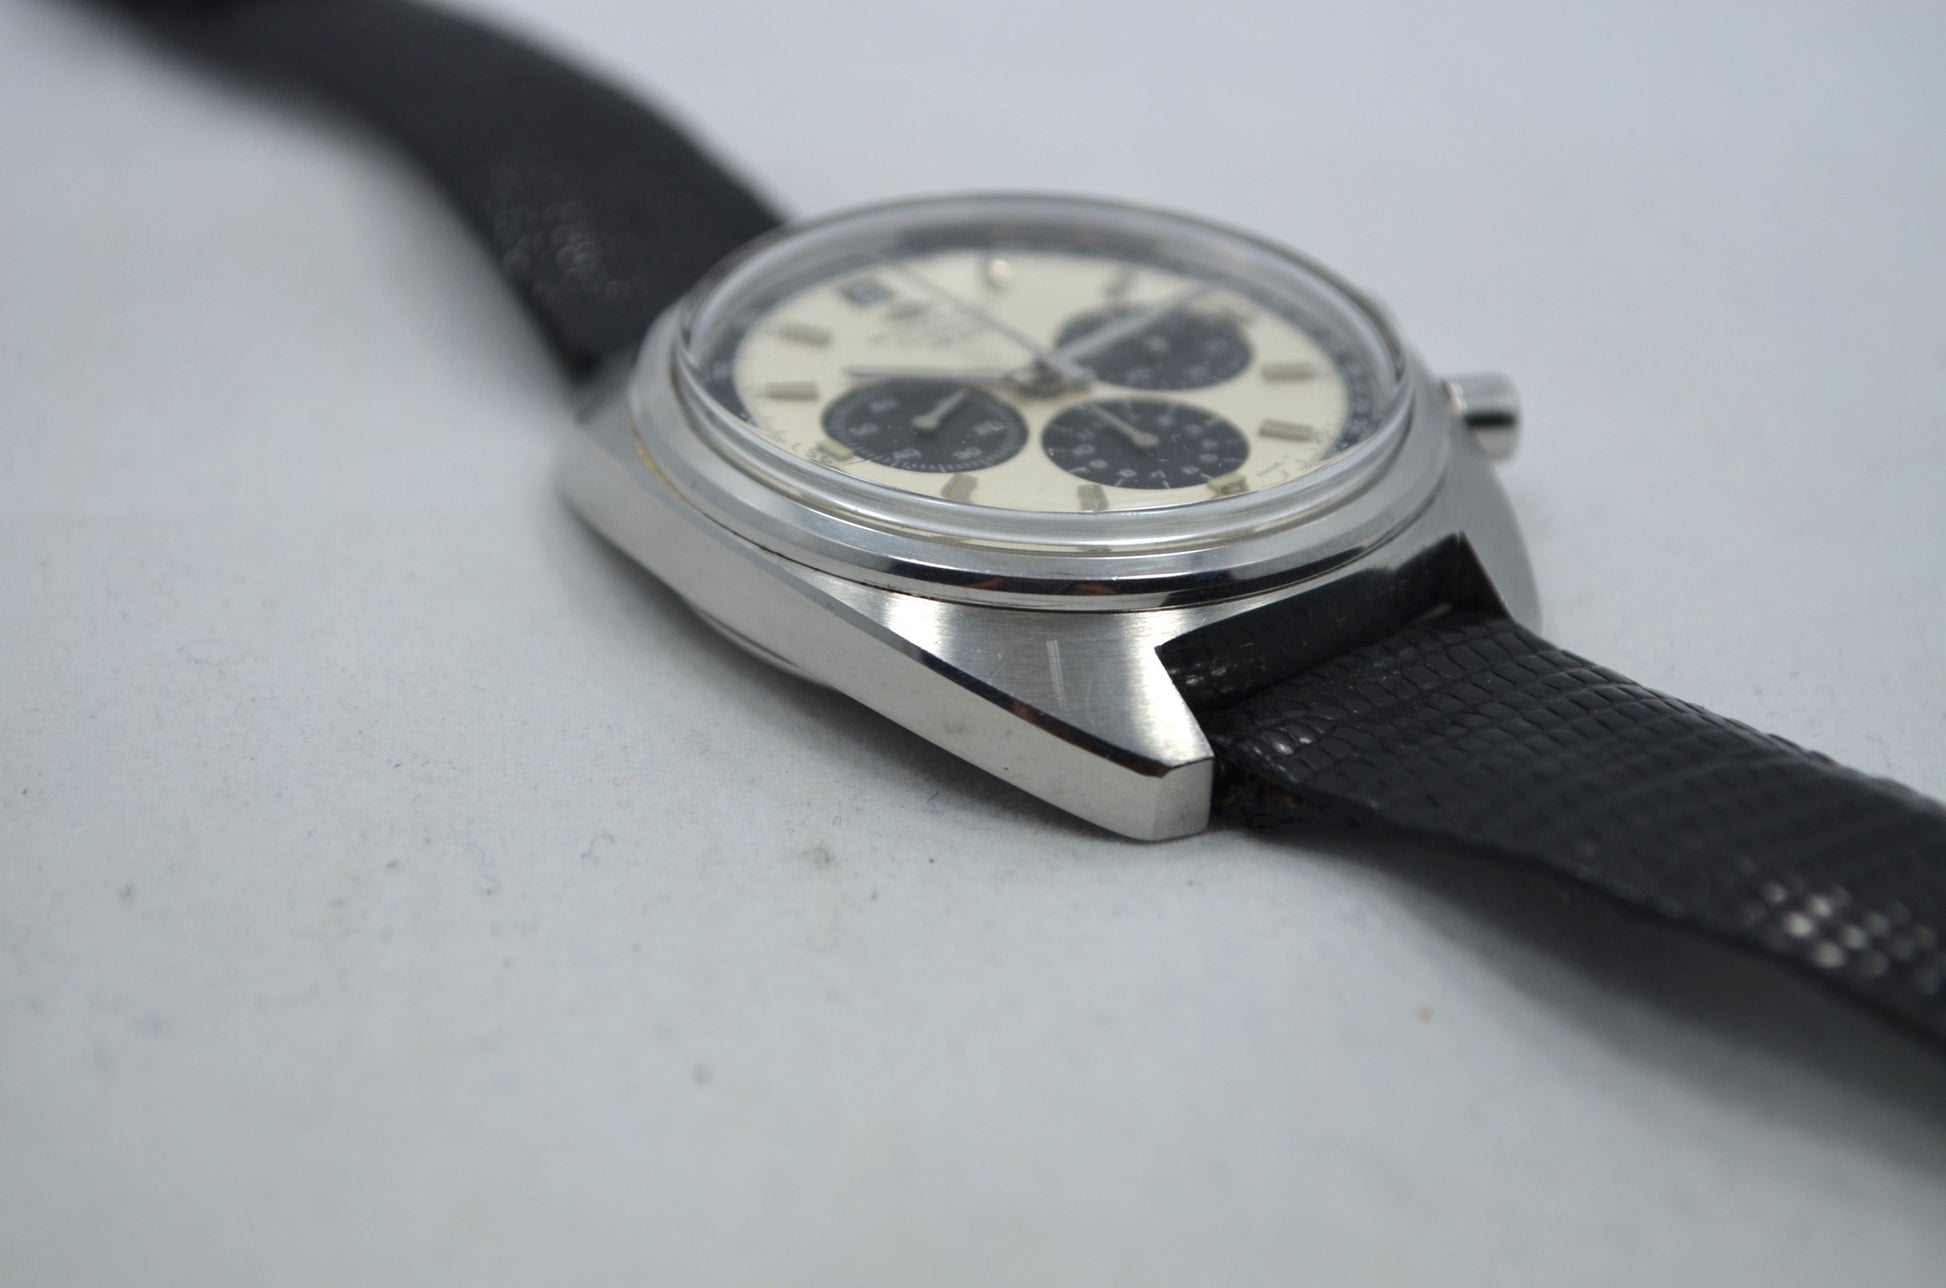 Vintage Movado Datron HS 360 Chronograph 1960's Steel Automatic Wristwatch - Hashtag Watch Company